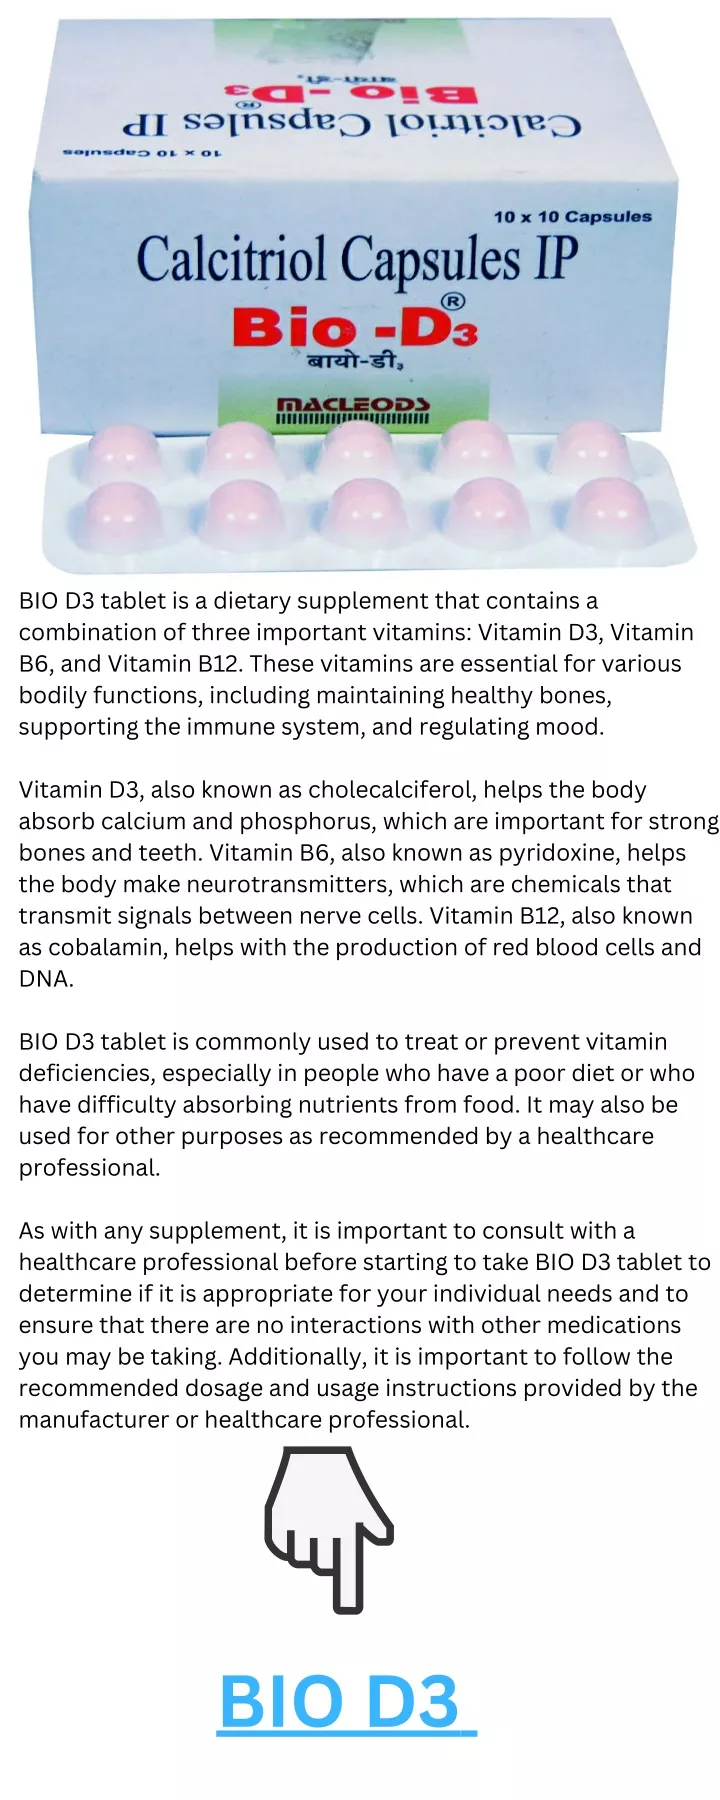 bio d3 tablet is a dietary supplement that